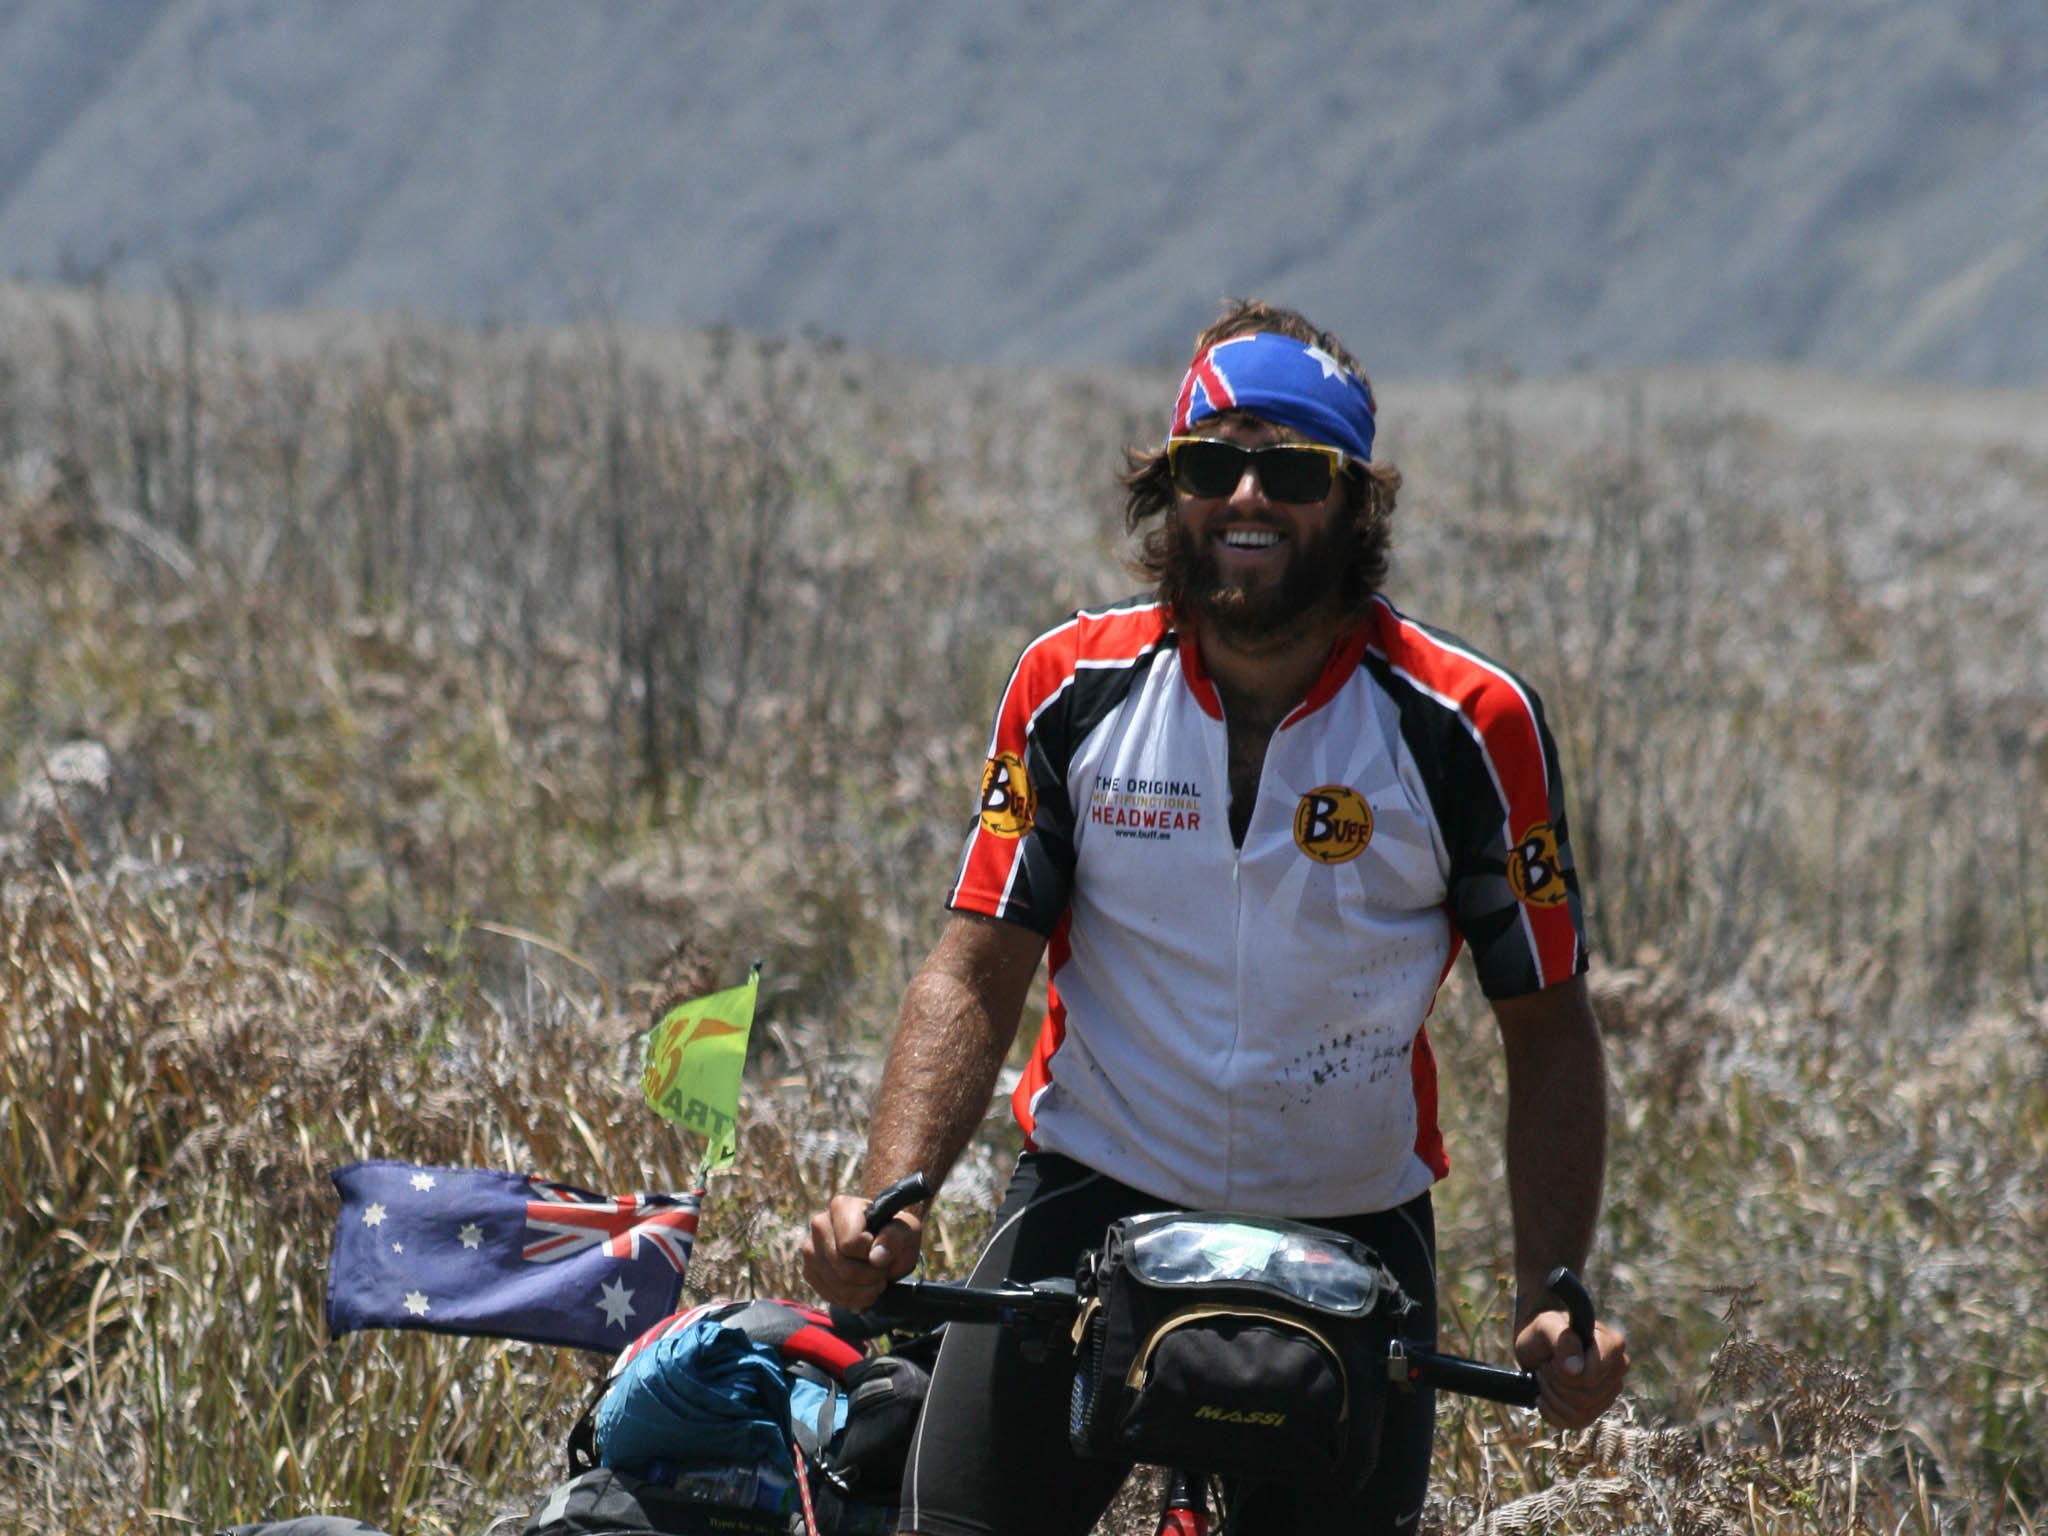 The horizontal image is a frontal shot of a man on a bicycle tour. It's Rian from EatSleepSurf.com. He has stopped in a field and is smiling at the camera. Rian is wearing Buff® team wear and a Australia Flag Original Buff®. It's obvious that non of the fabrics are wet or clingy. The location is in the highlands of Indonesia. It looks hot. But there are signs that there is also a chilly breeze. Rian is wearing his Original Buff® in layers. His flags on the bike are also flying. Source: EatSleepSurf.com.au Copyright: EatSleepSuf.com.au